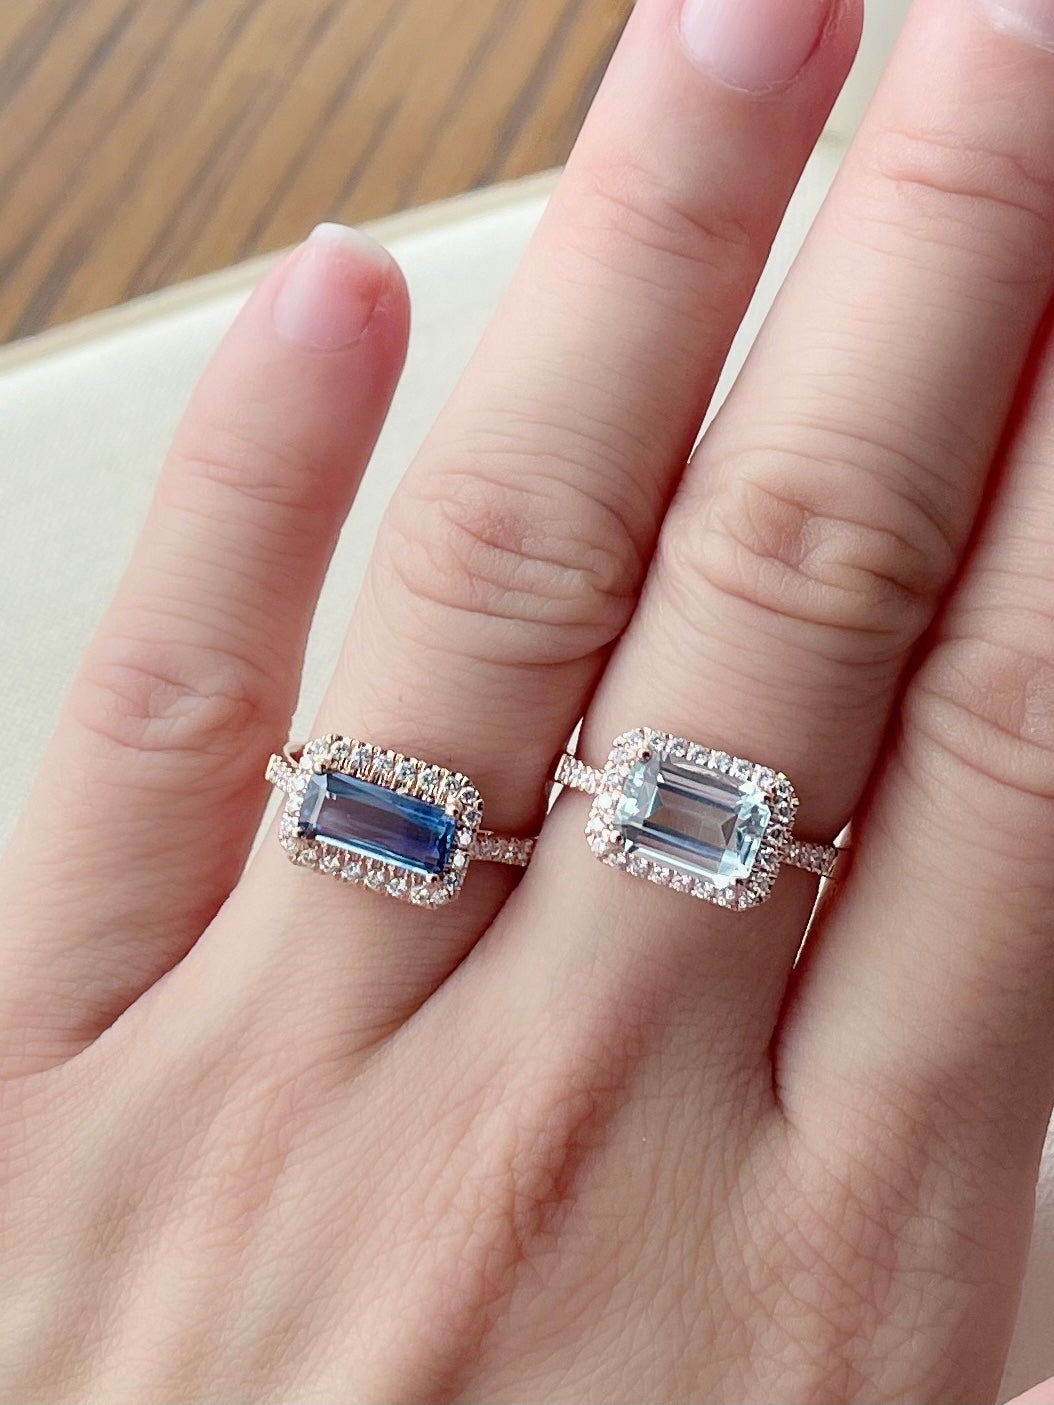 Ring in Platinum with an Aquamarine and Diamonds